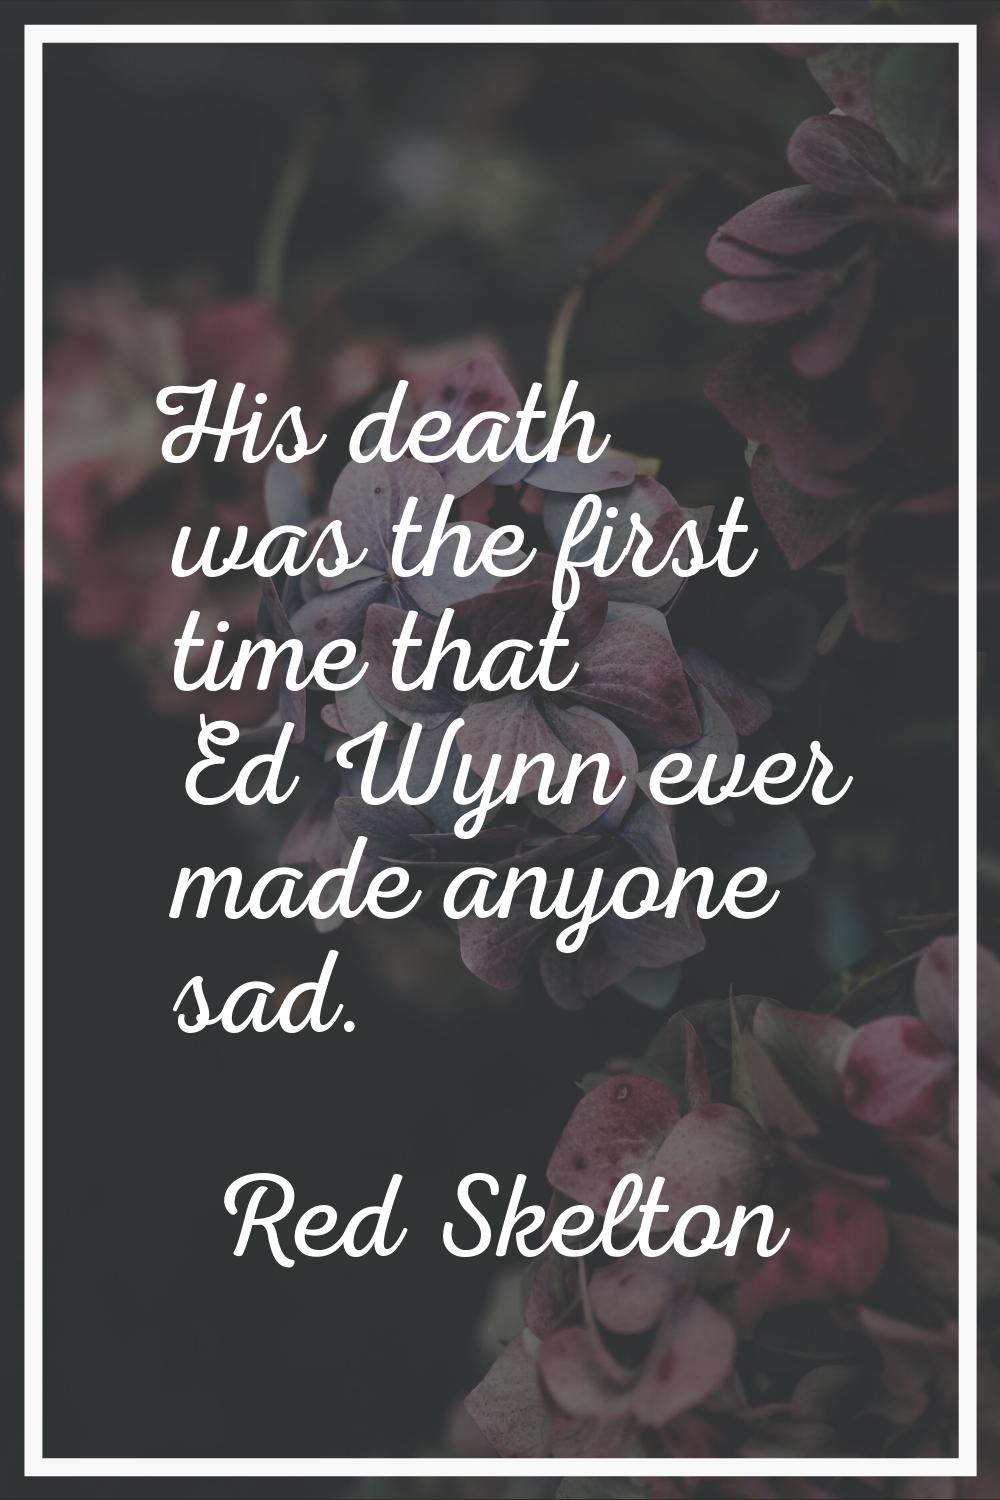 His death was the first time that Ed Wynn ever made anyone sad.